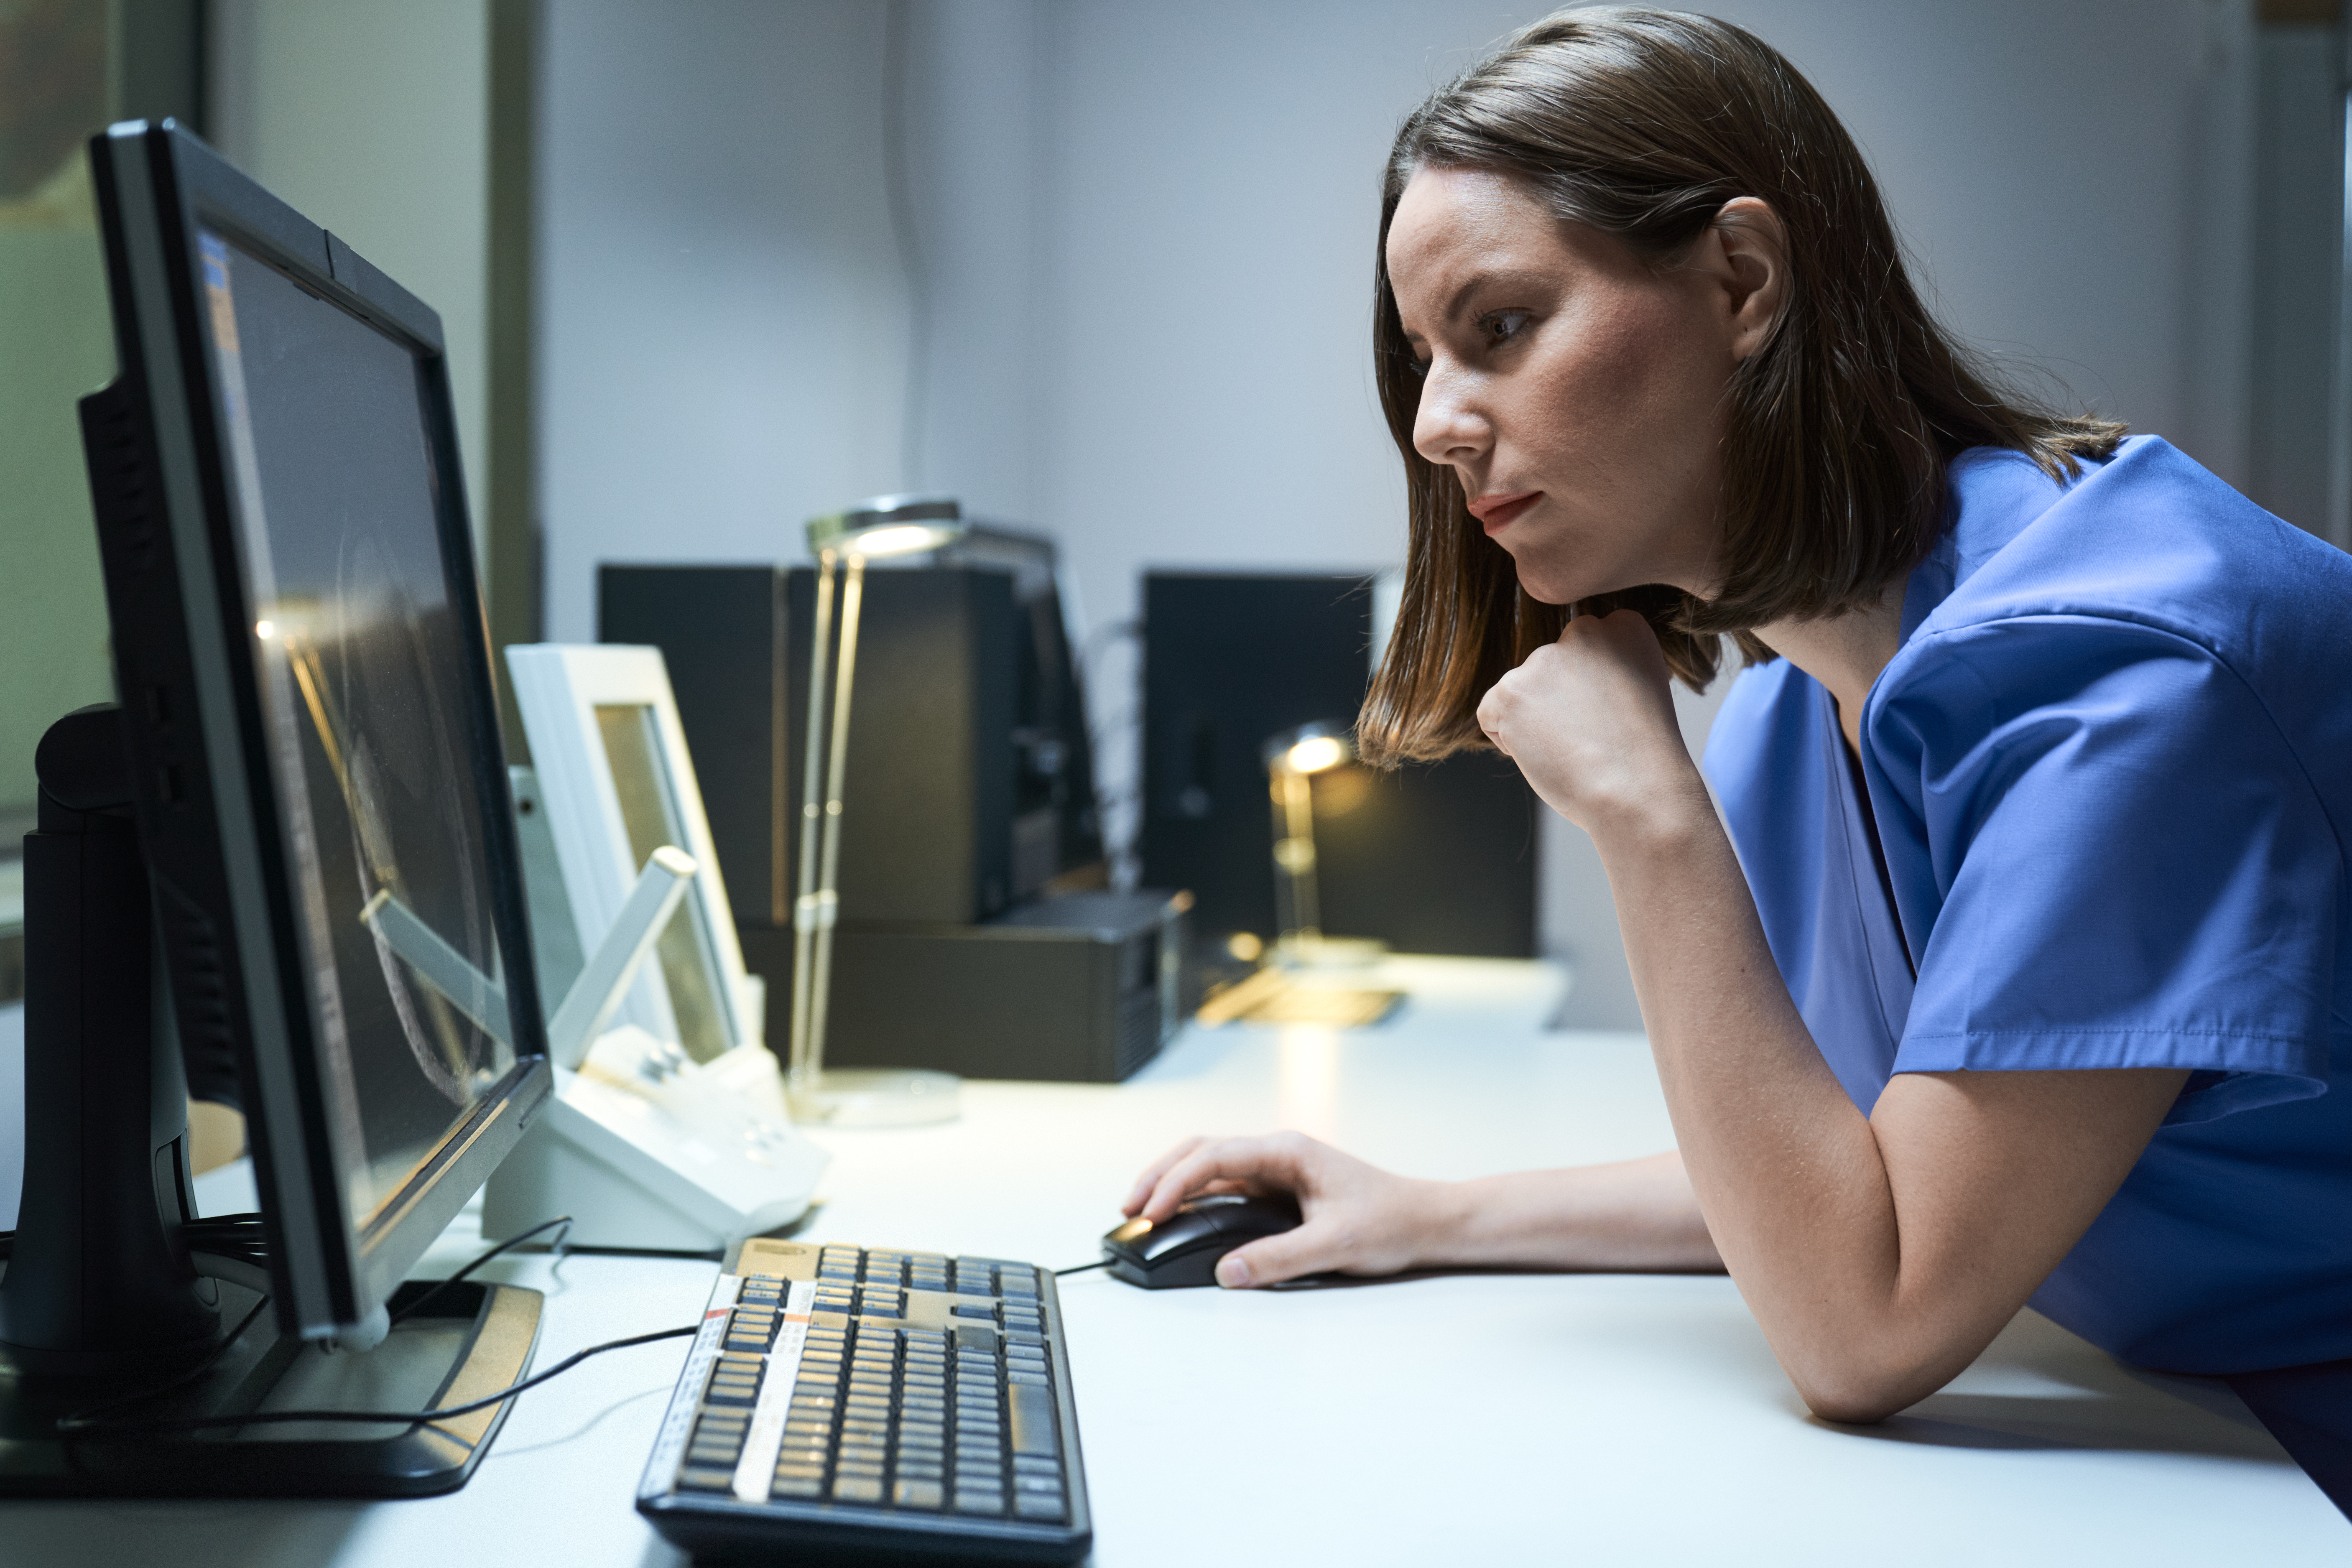 Healthcare worker looking closely at computer in dark room